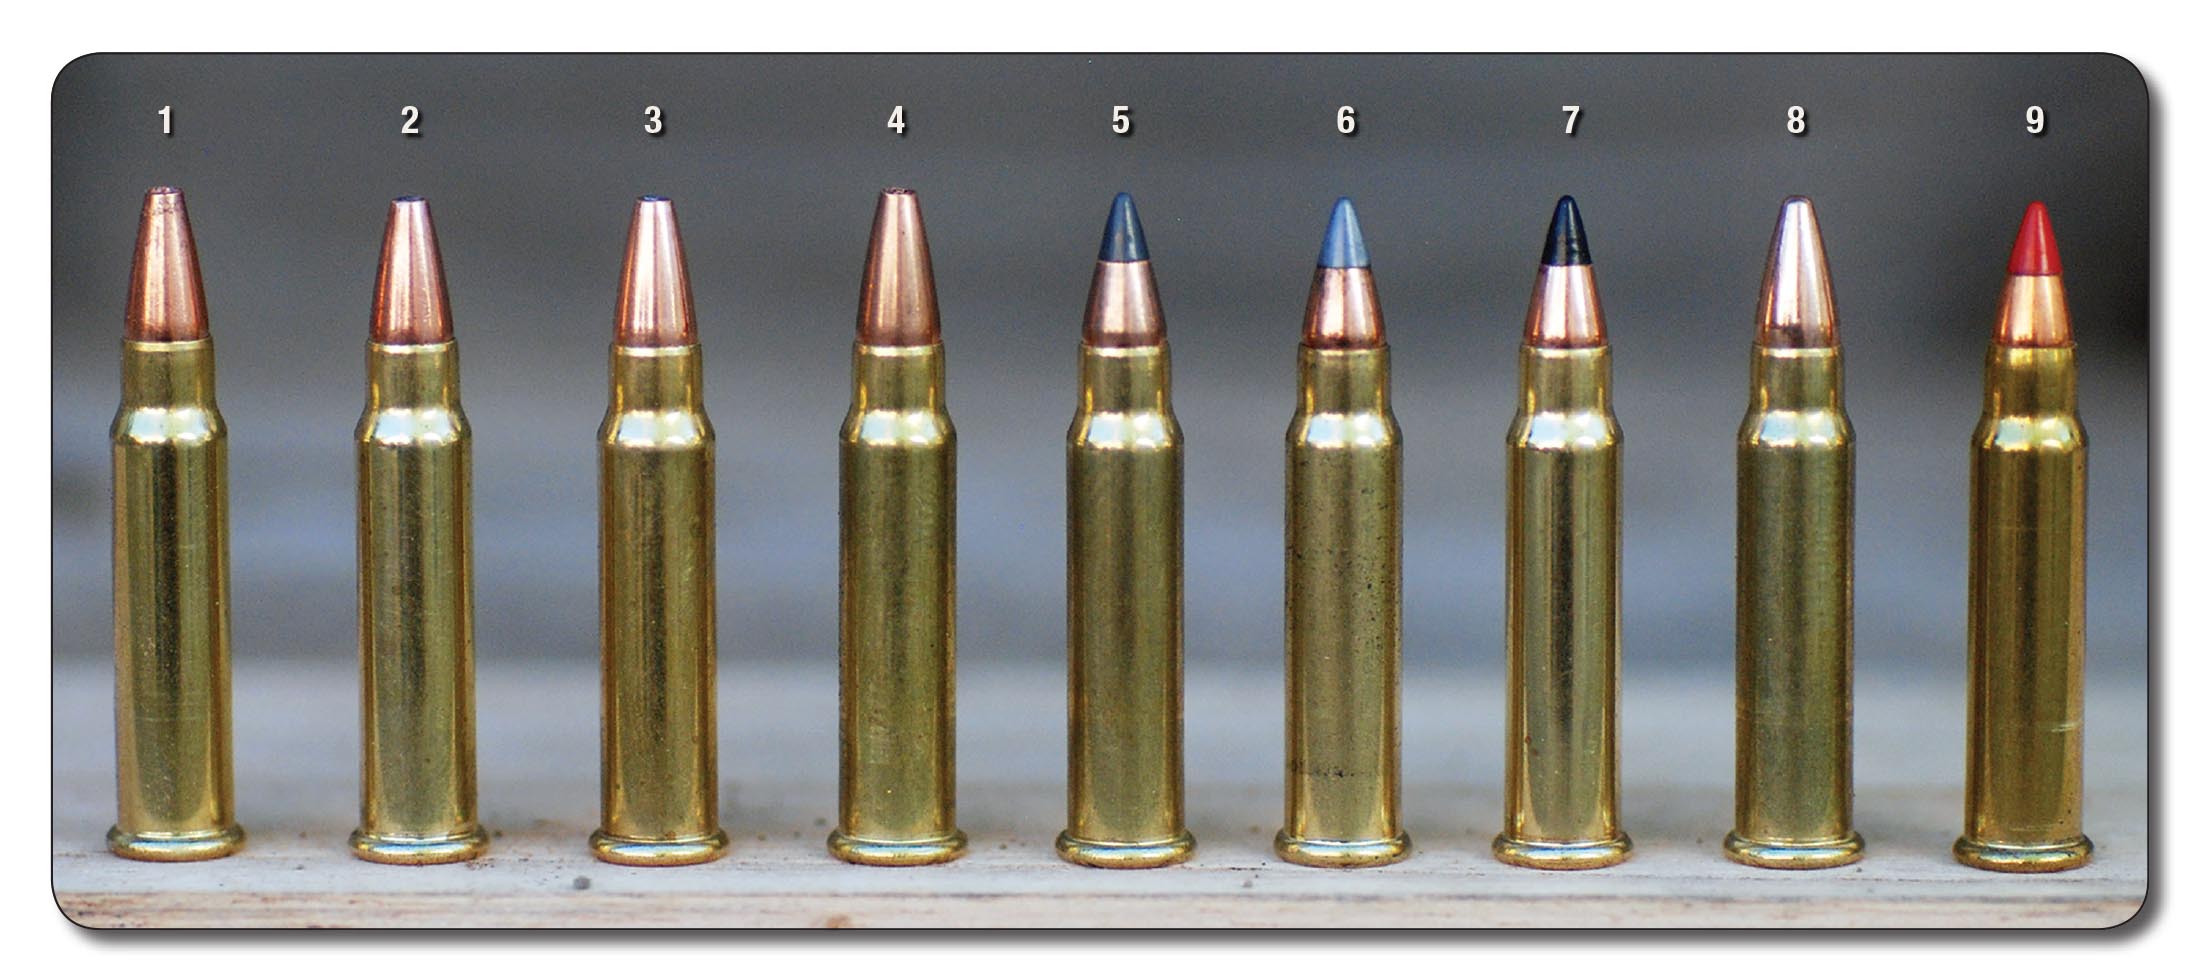 There are a variety of .17 HMR rounds available today: (1) CCI TNT Green 16-grain non-lead hollowpoint, (2) Hornady XTP 20 hollowpoint, (3) CCI Gamepoint 20 softpoint, (4) Federal Premium 17 TNT hollowpoint, (5) CCI A17 Varmint Tip 17 polymer tip, (6) Winchester HV 17 polymer tip, (7) CCI V-MAX 17 polymer tip, (8) CCI 20 FMJ and the (9) original Hornady V-MAX 17-grain polymer tip.